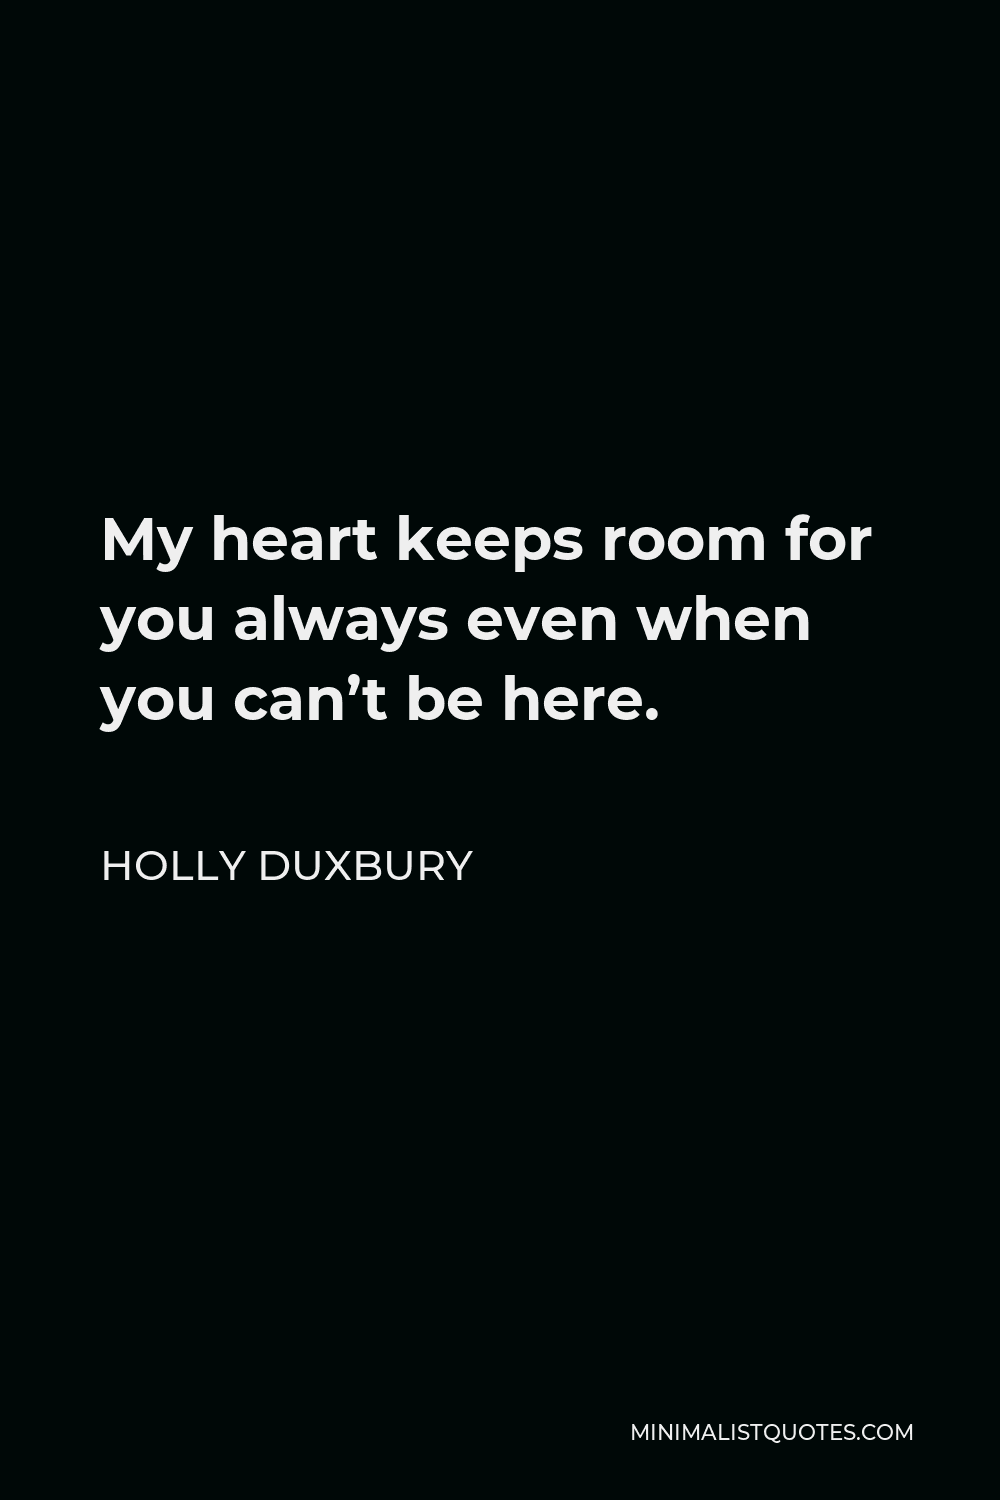 Holly Duxbury Quote - My heart keeps room for you always even when you can’t be here.